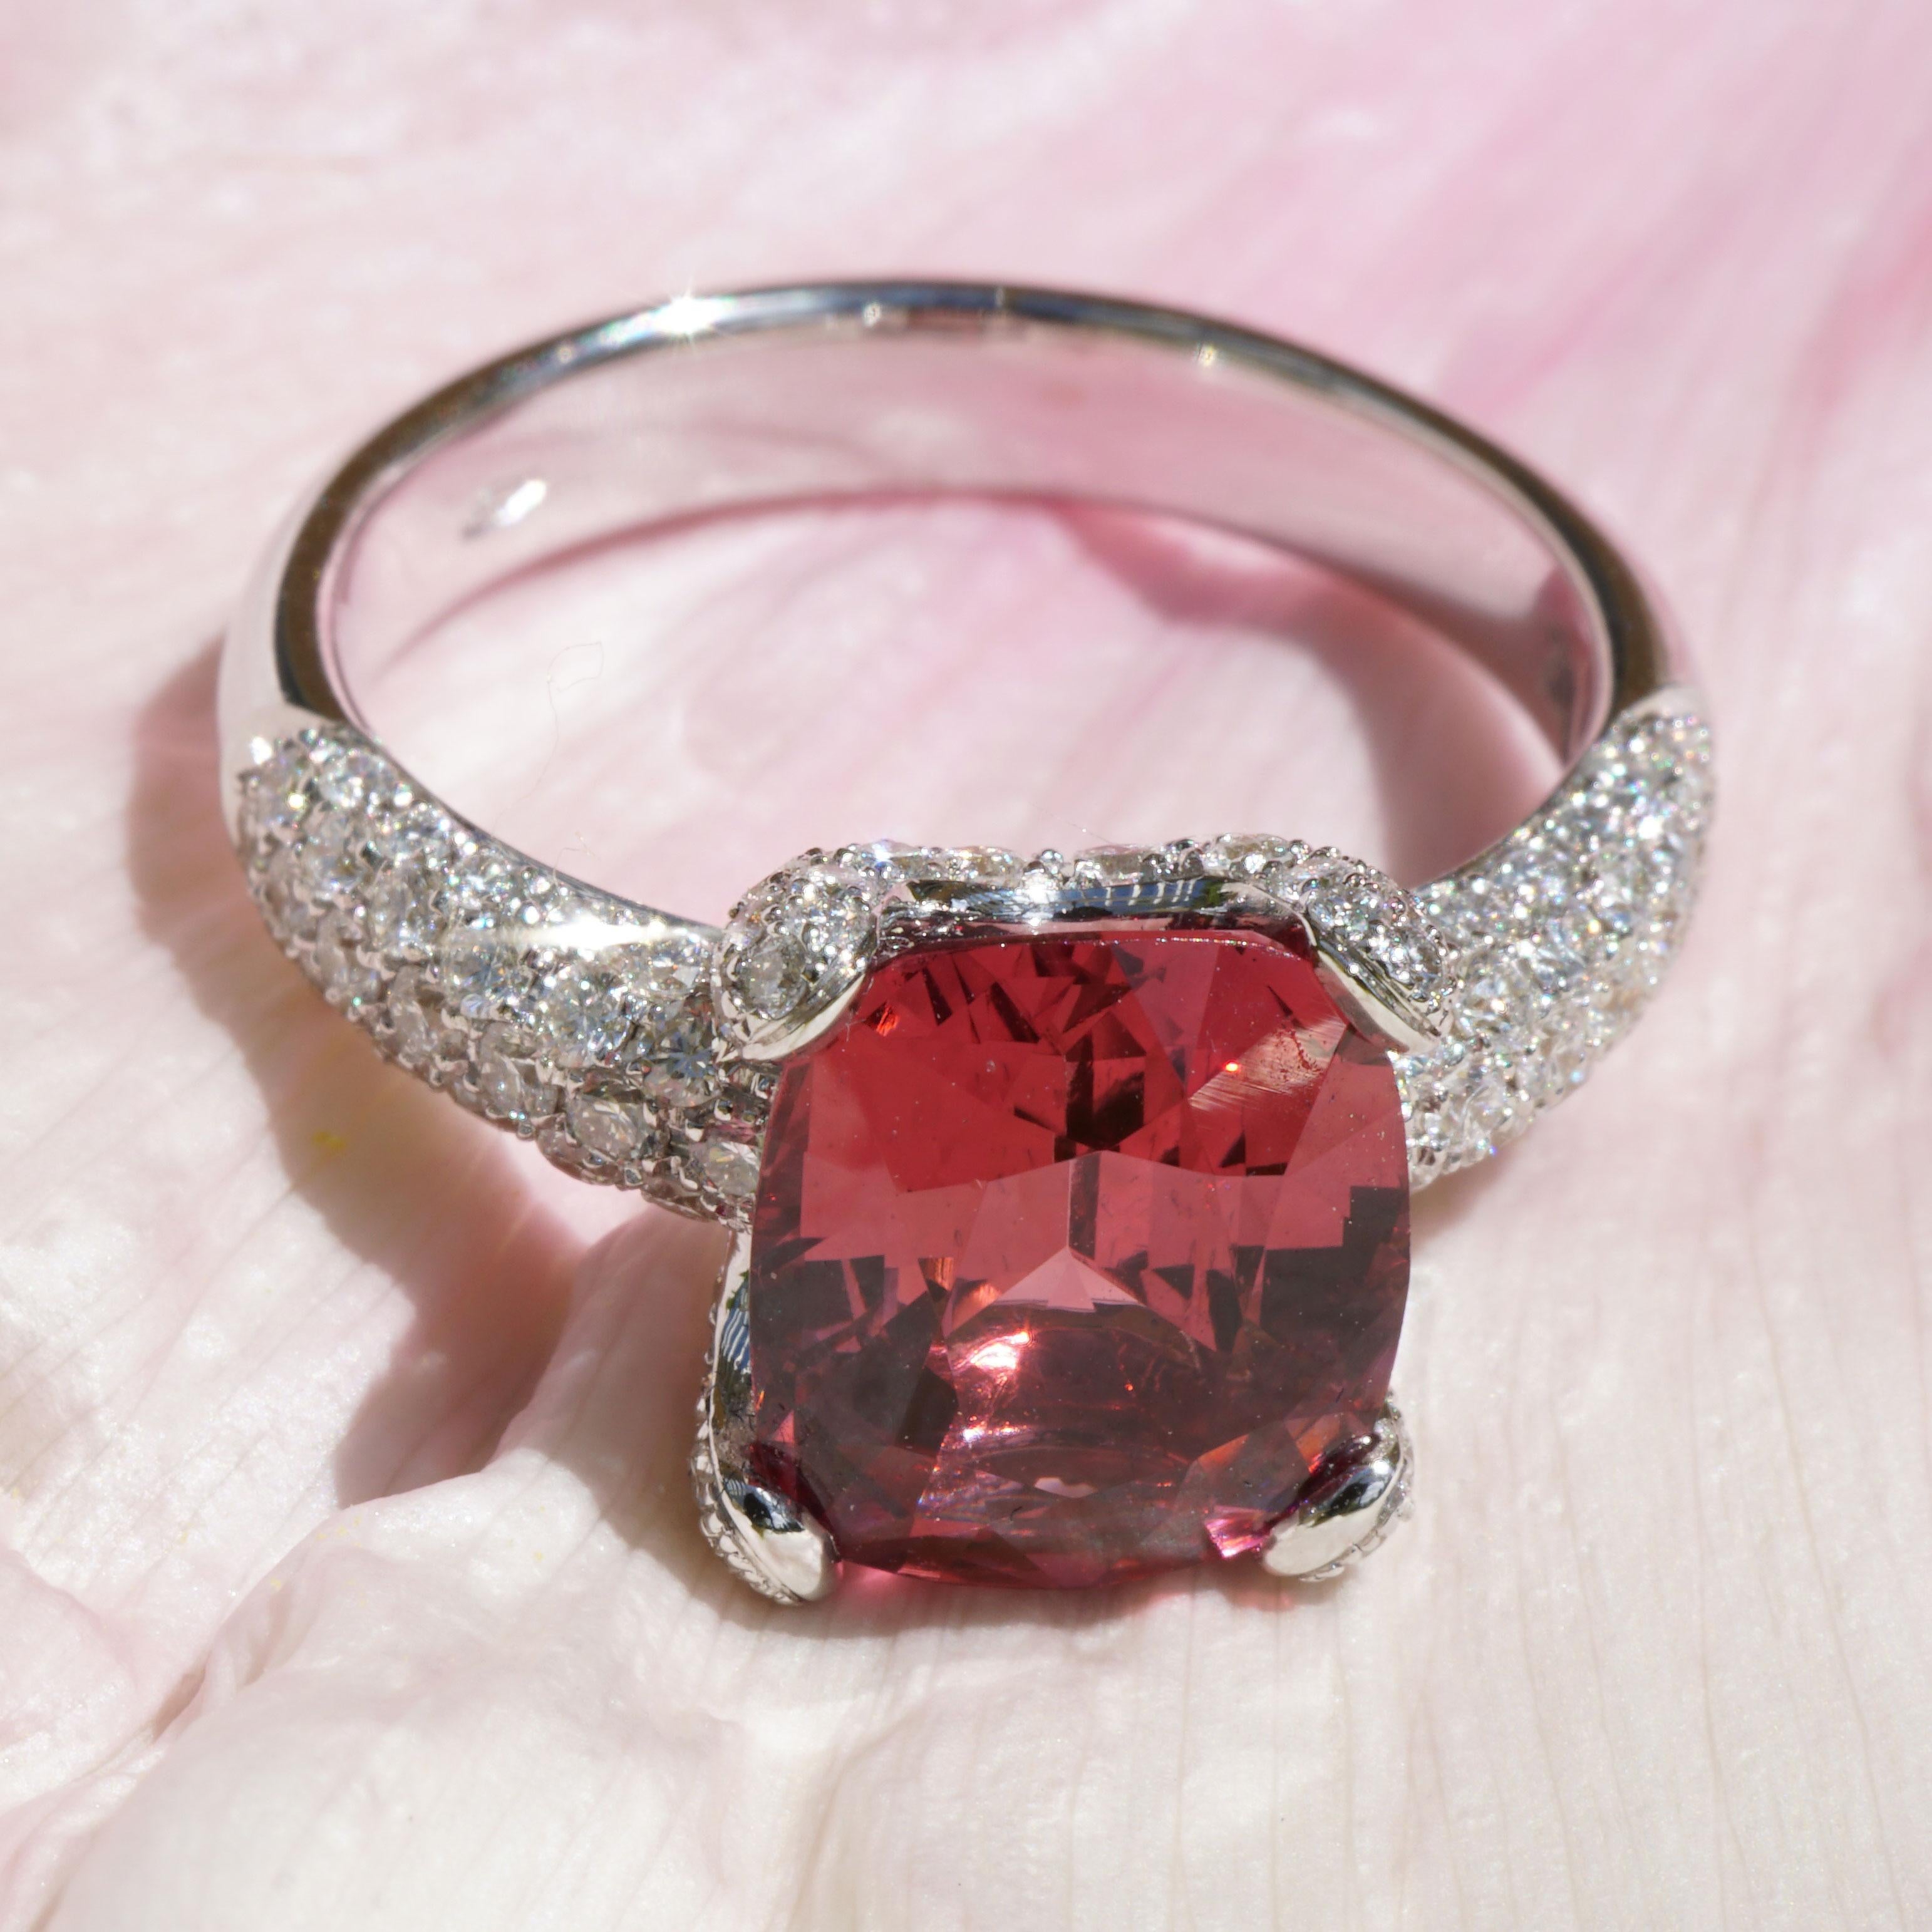 Modern 3.65 ct AAA+ Red Spinel Brilliant Ring  White Gold Mine Badachshan Afghanistan 